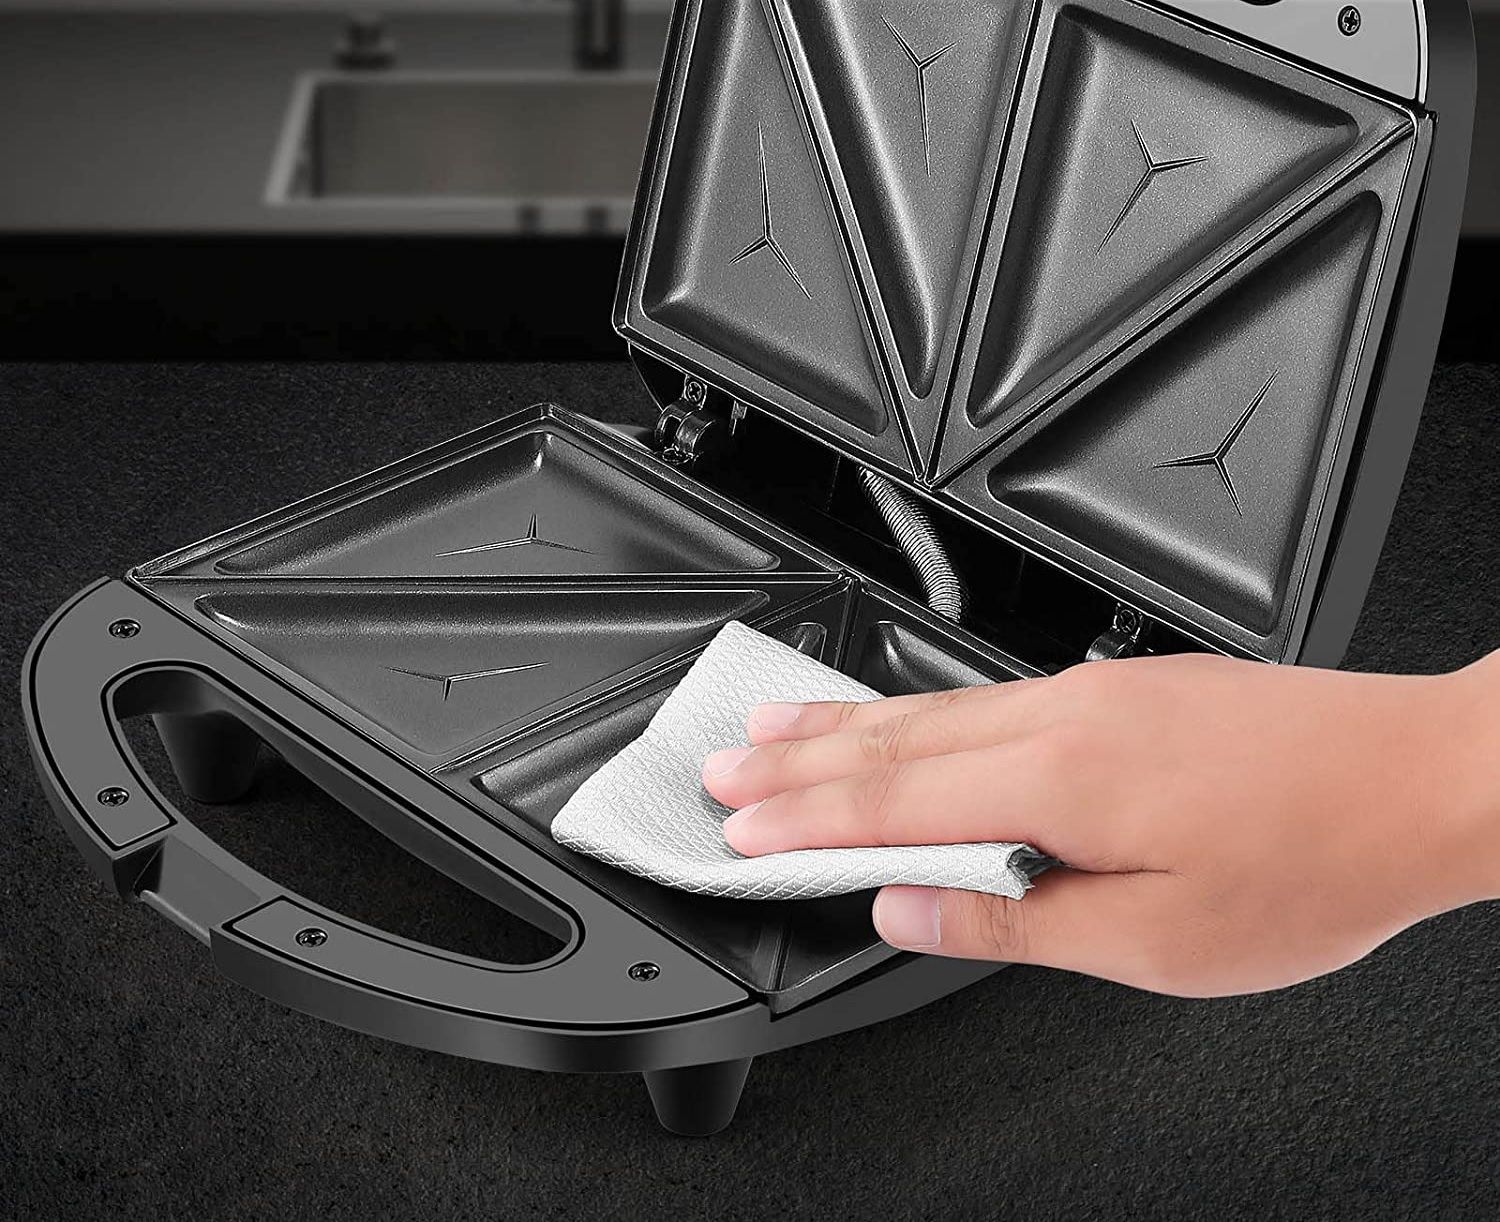 the ostba sandwich maker features easy cleanup